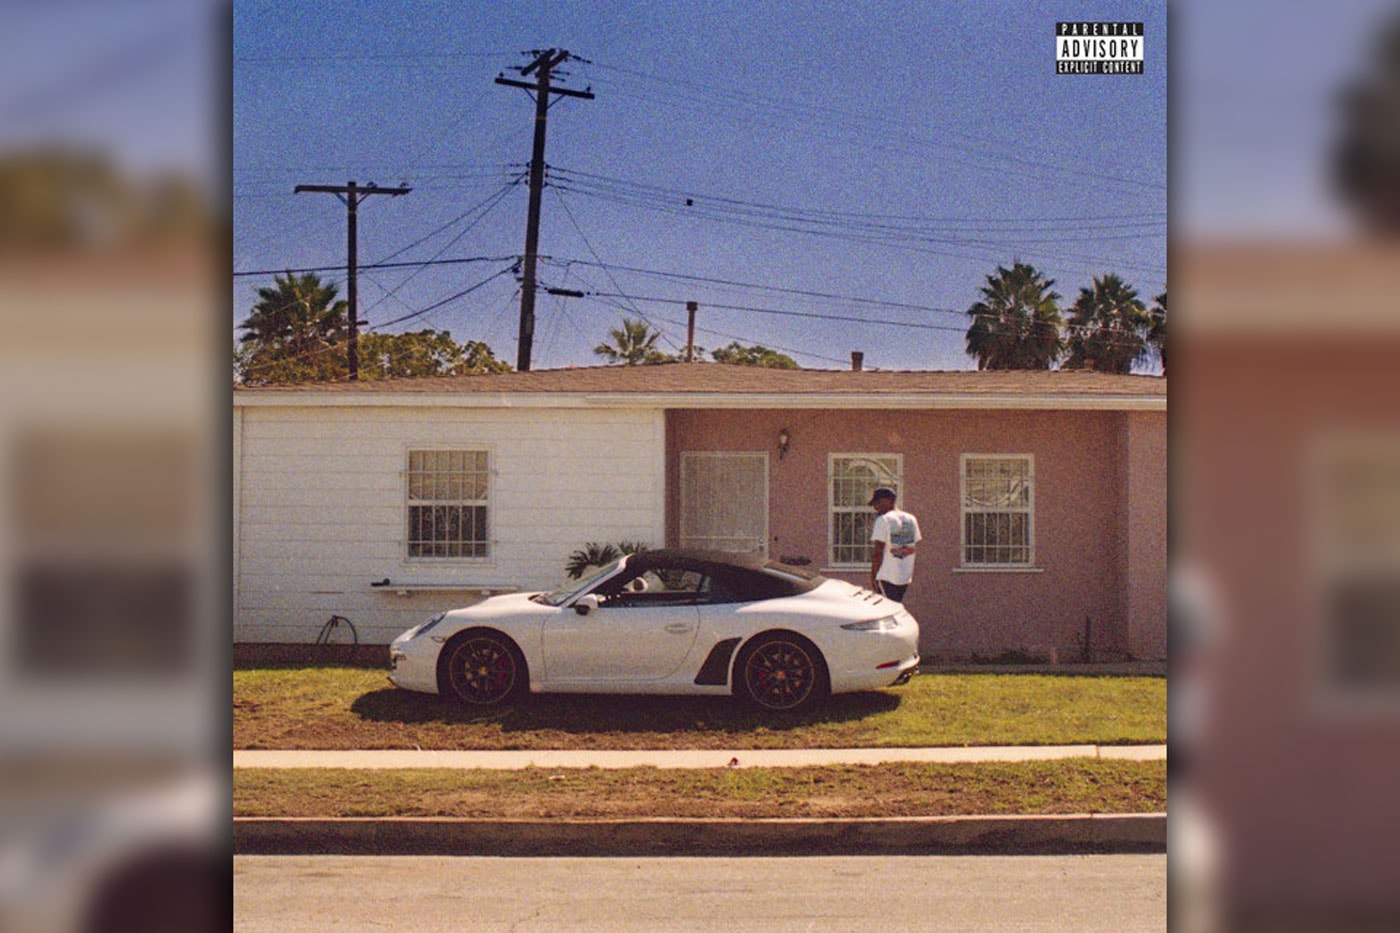 Dom Kennedy Los Angeles Is Not For Sale Vol 1 Album